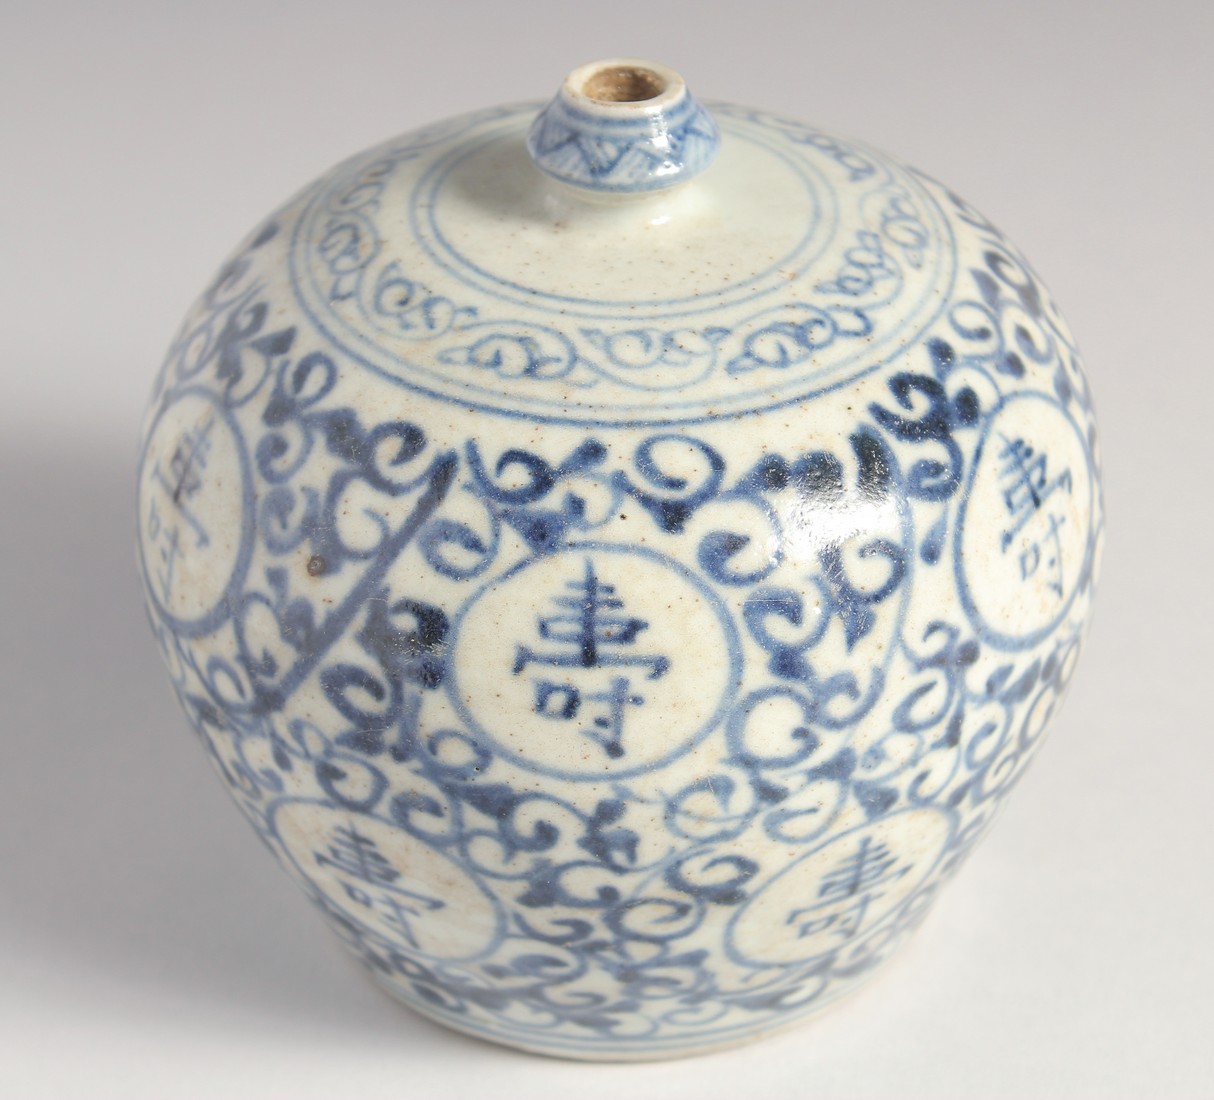 A SMALL CHINESE BLUE AND WHITE PORCELAIN BULBOUS VASE, painted with characters, 11.5cm high.